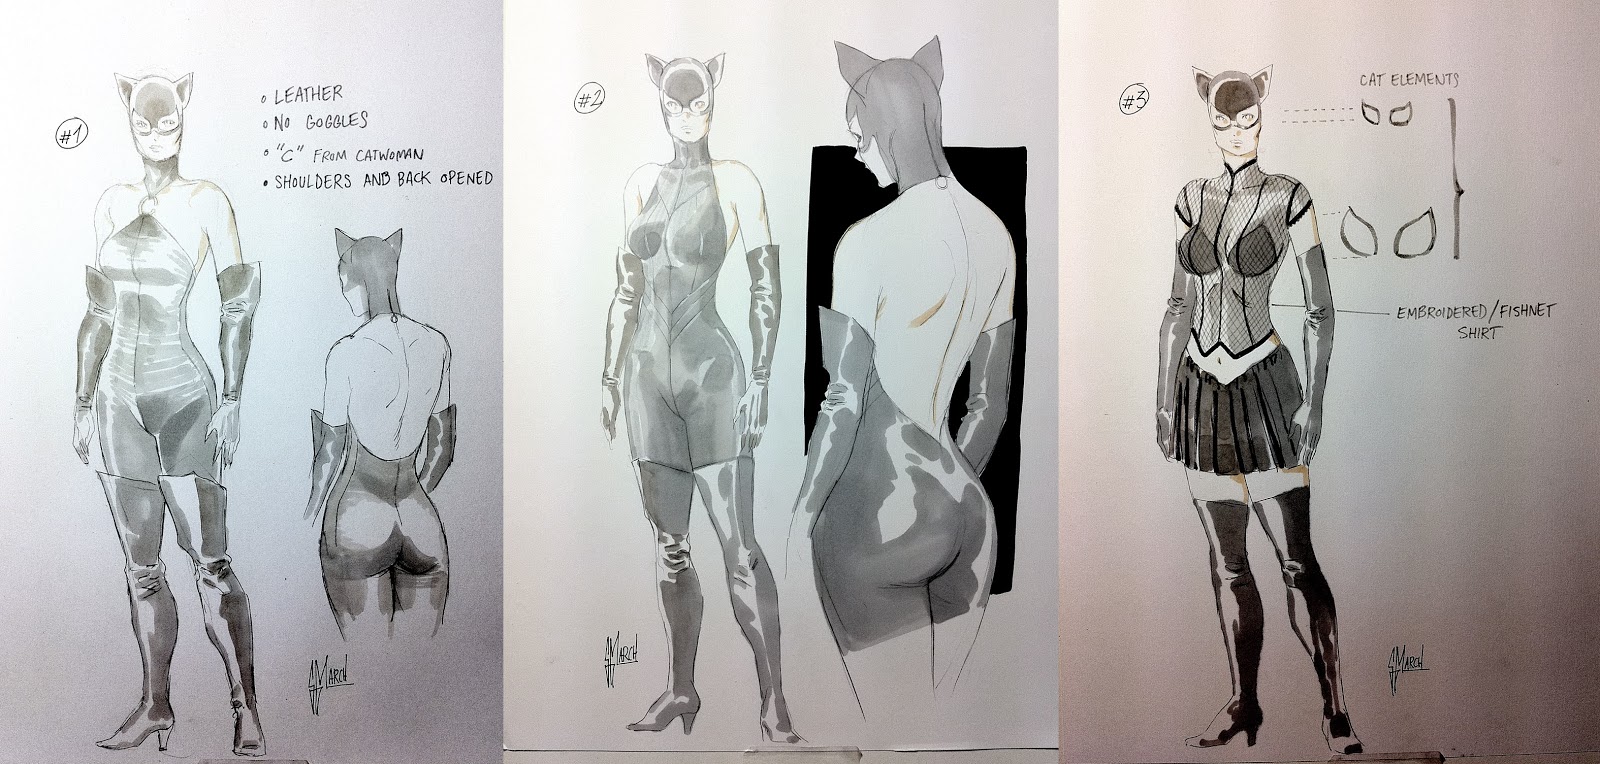 CATWOMAN designs by Guillem March